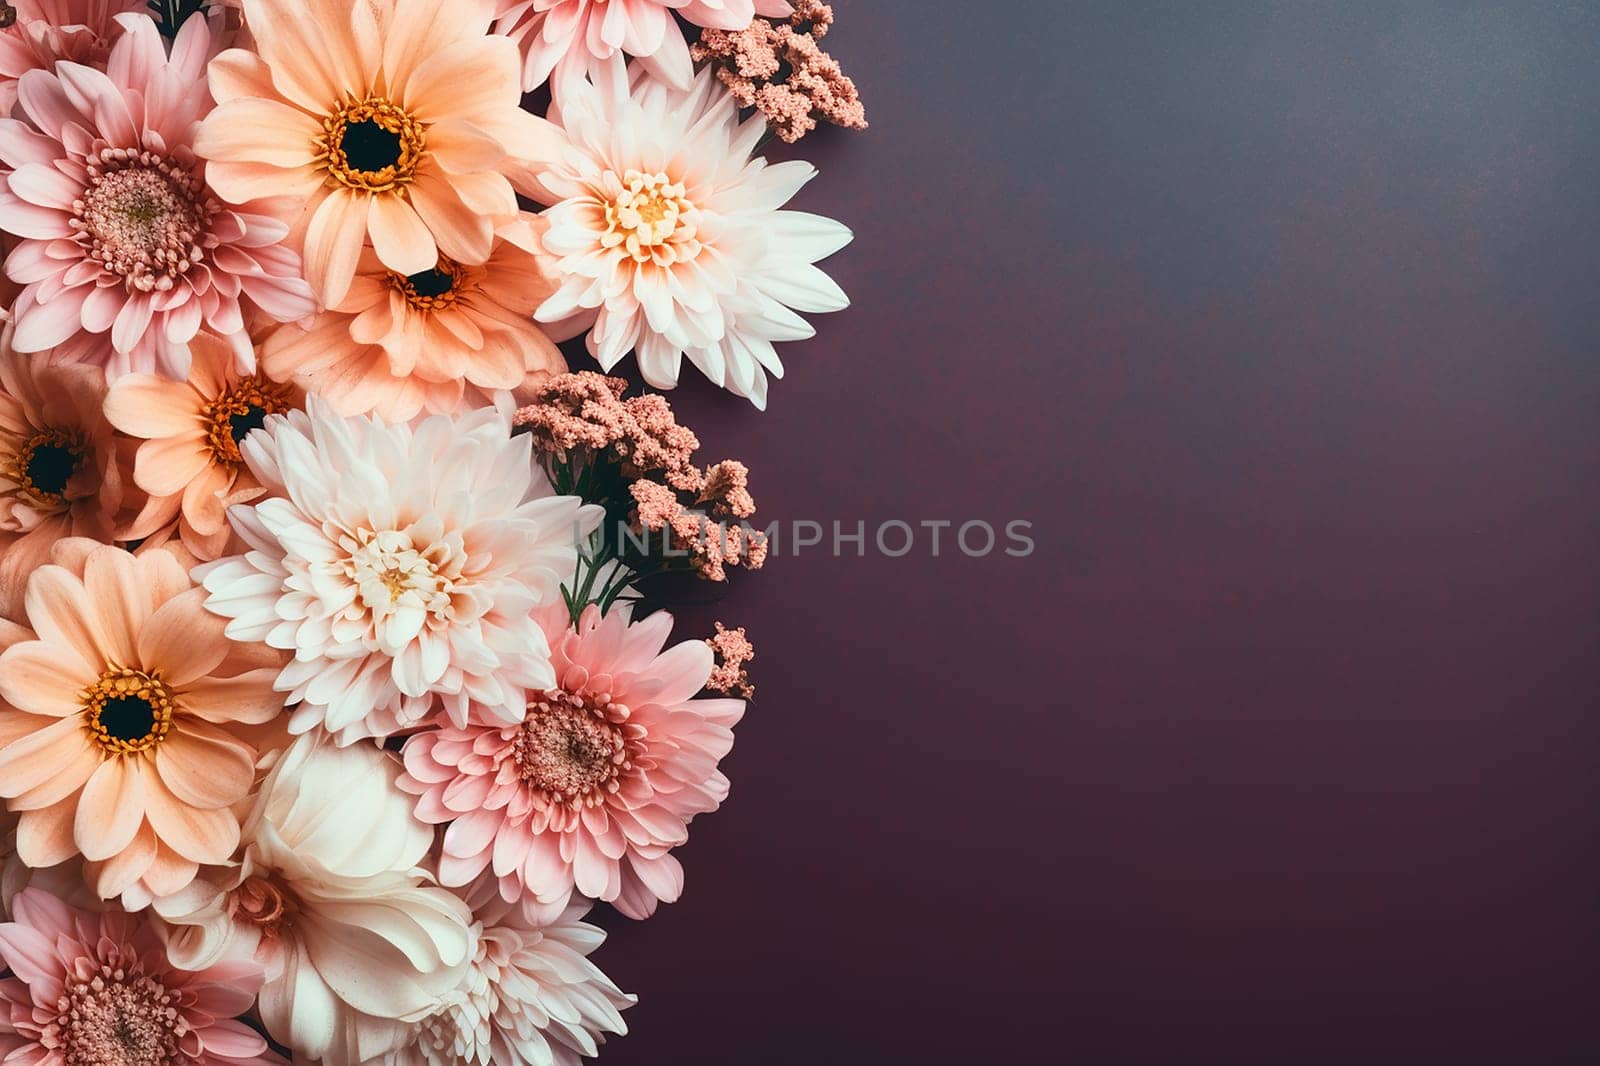 Assortment of beautiful flowers on a gradient background.